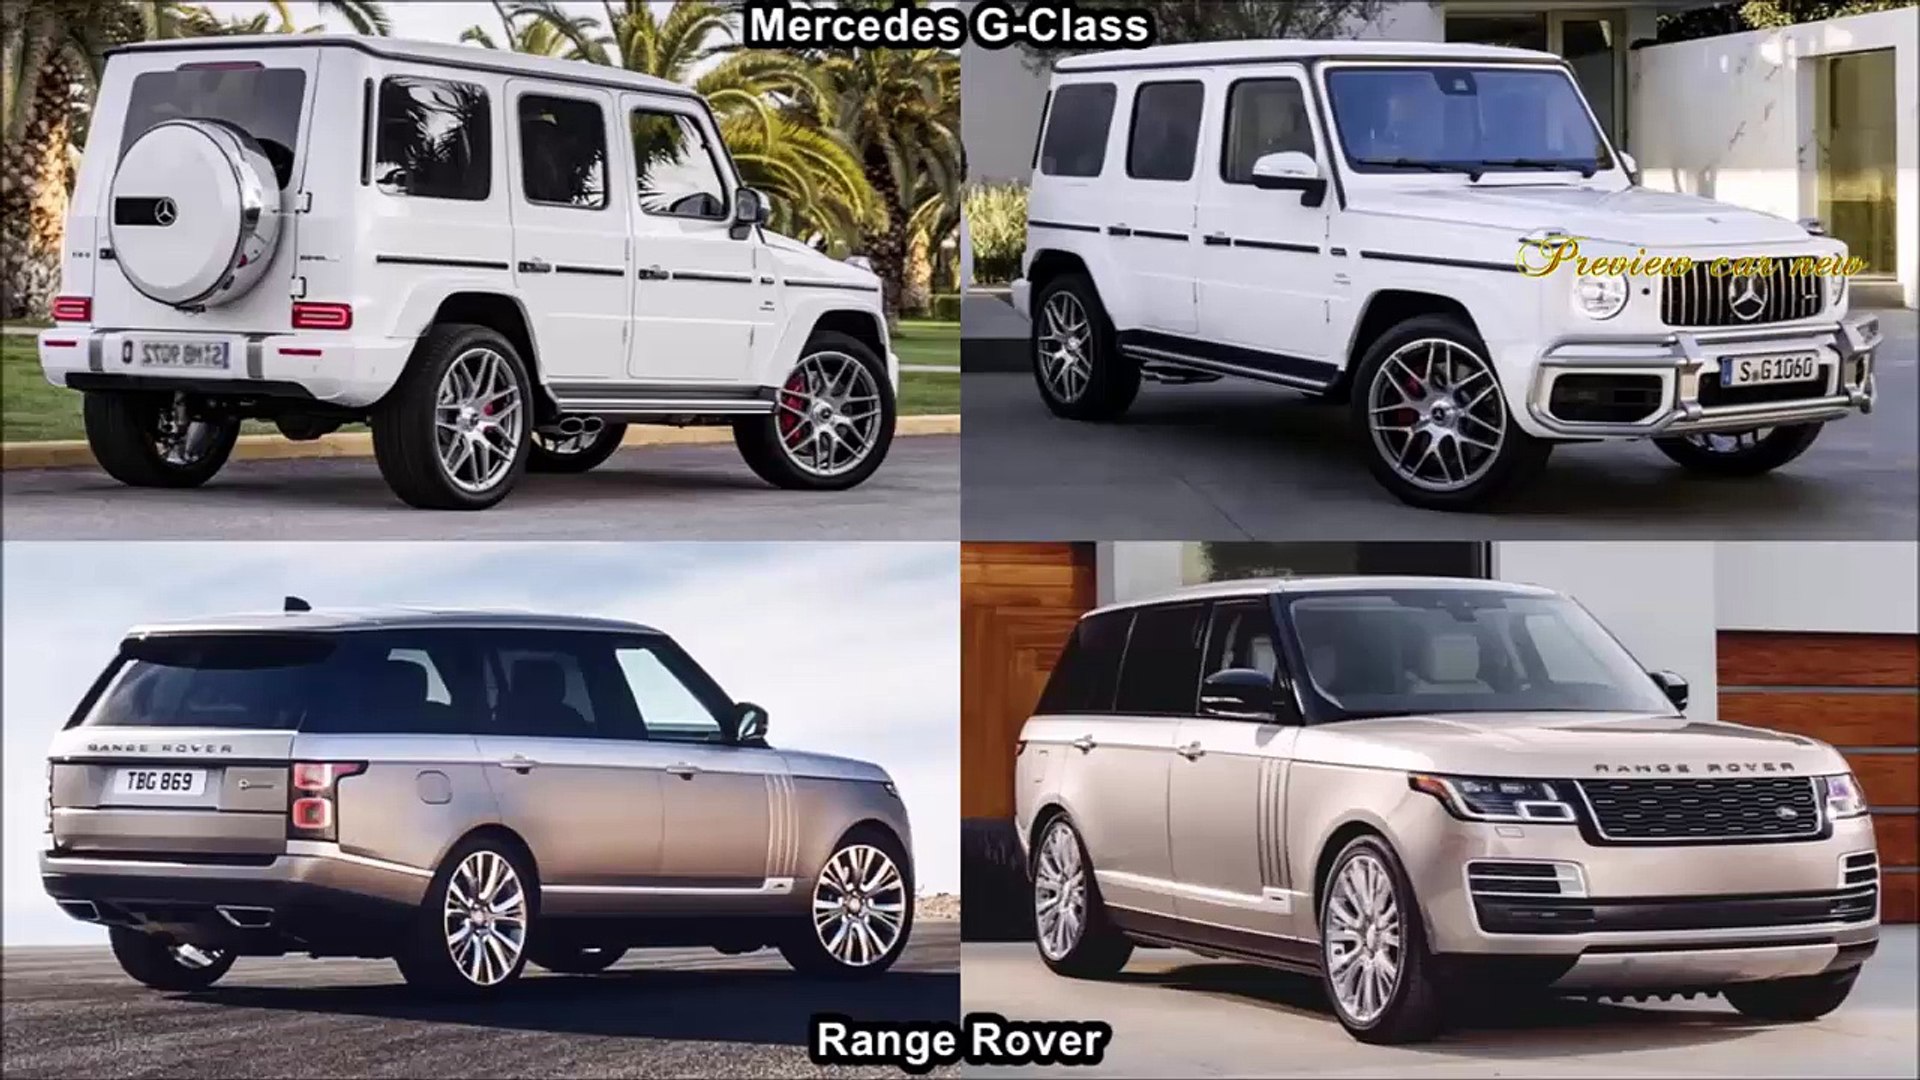 Car and driver - 2018 Range Rover Vs 2019 Mercedes G-Class - Review of  exterior and interior - video Dailymotion